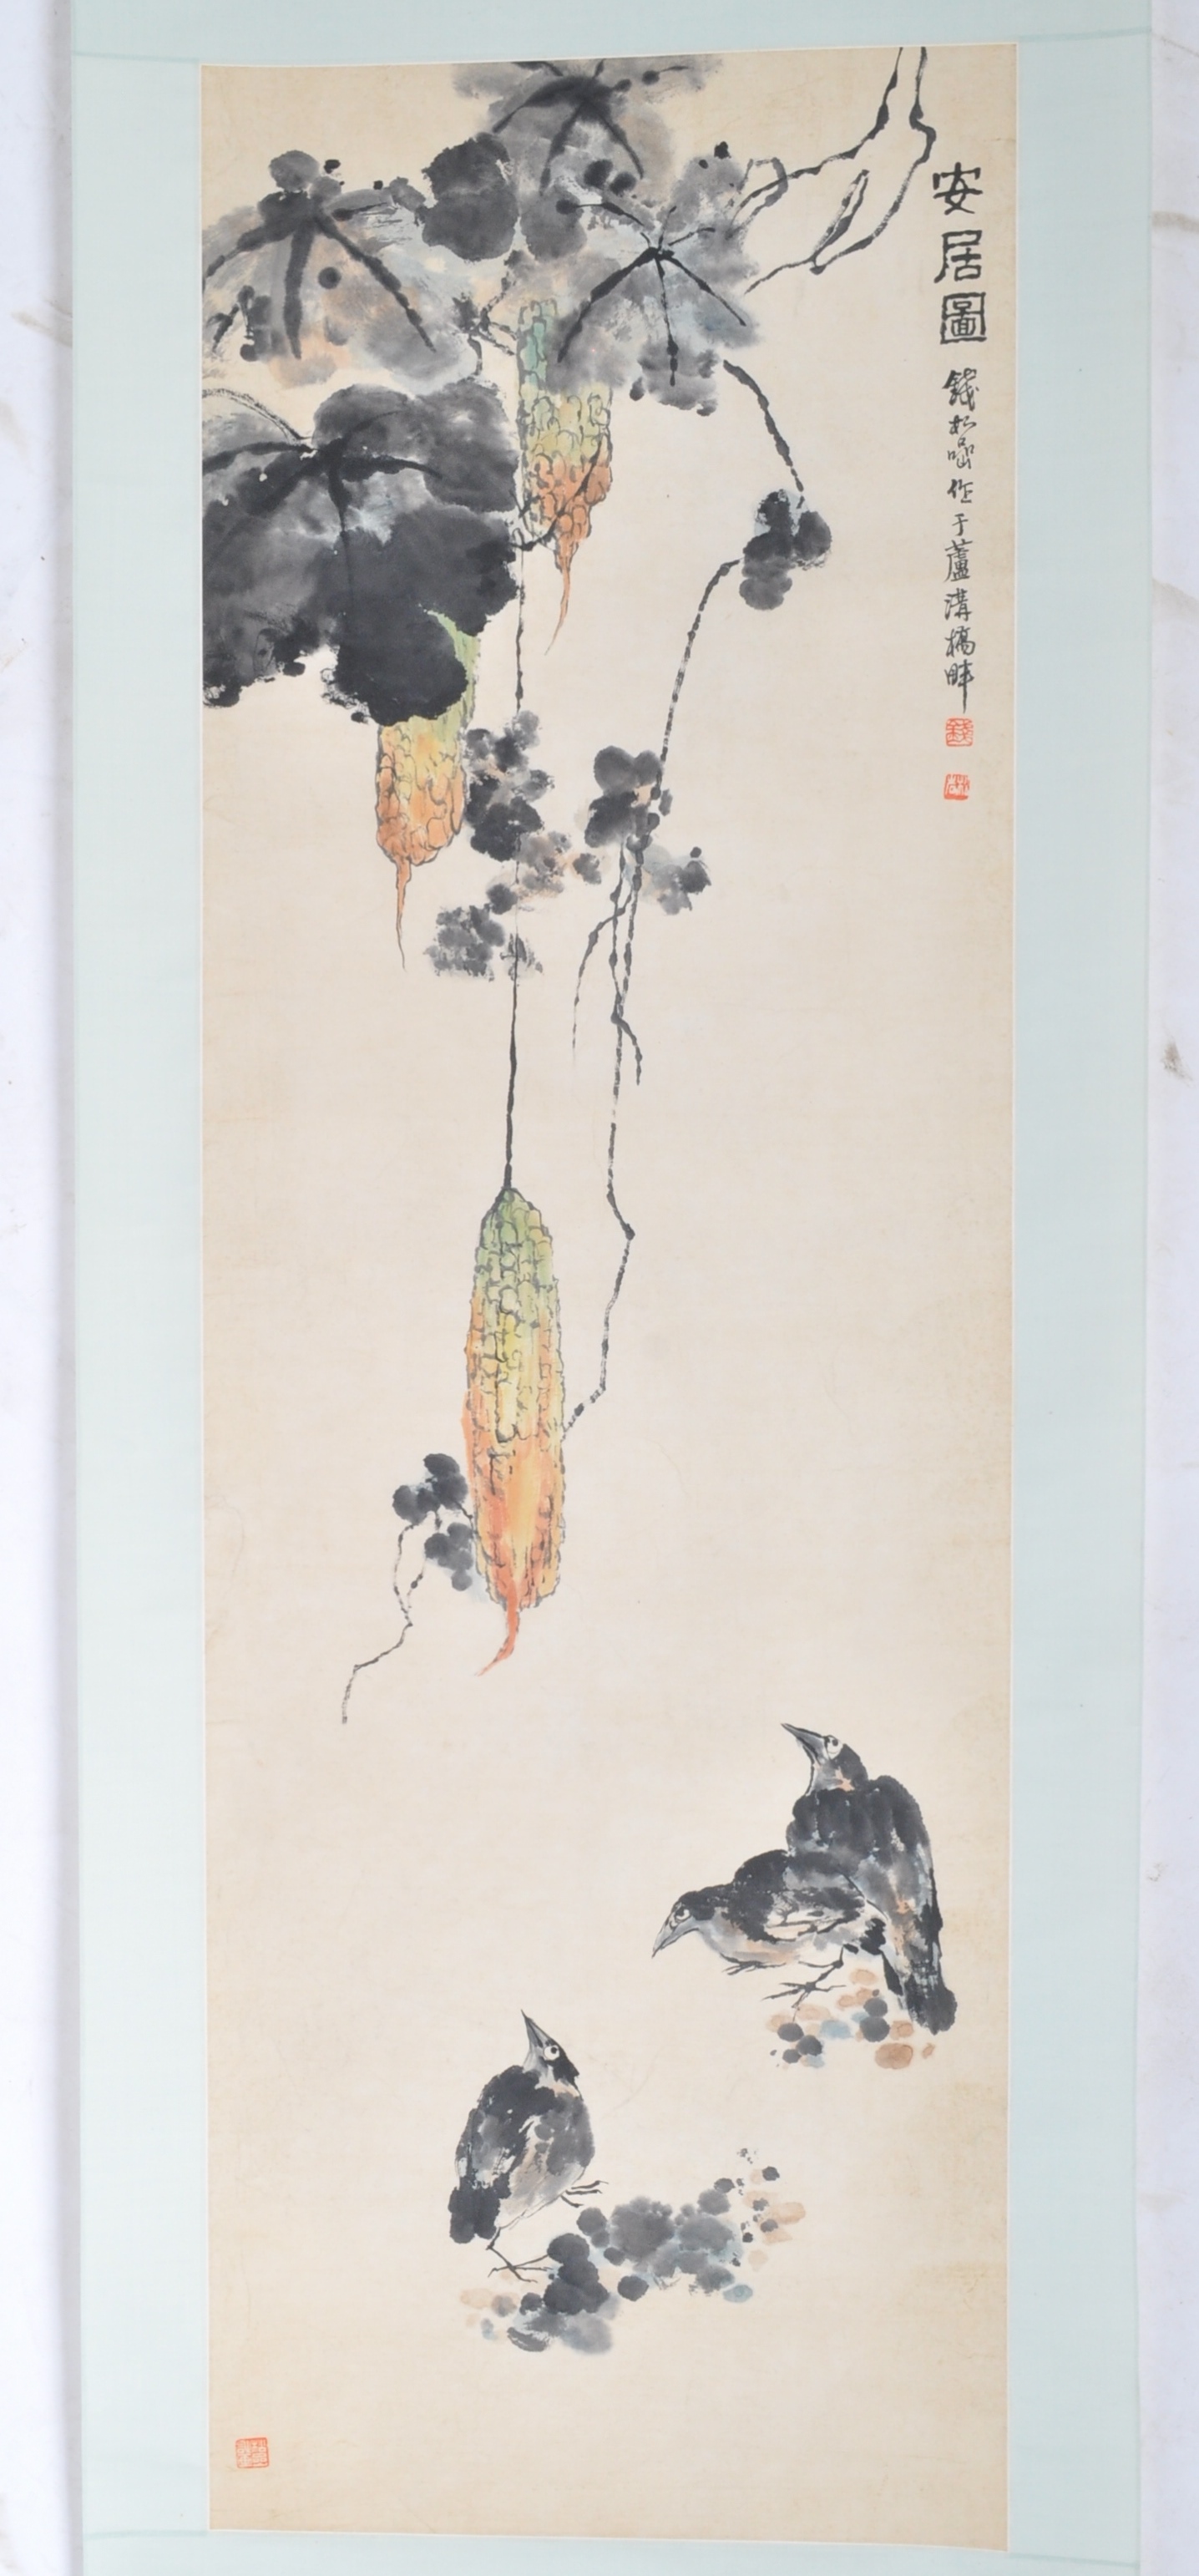 QIAN SONGYAN (1898-1985) - A MOMENT OF PEACEFUL LIFE CHINESE SCROLL - Image 2 of 5